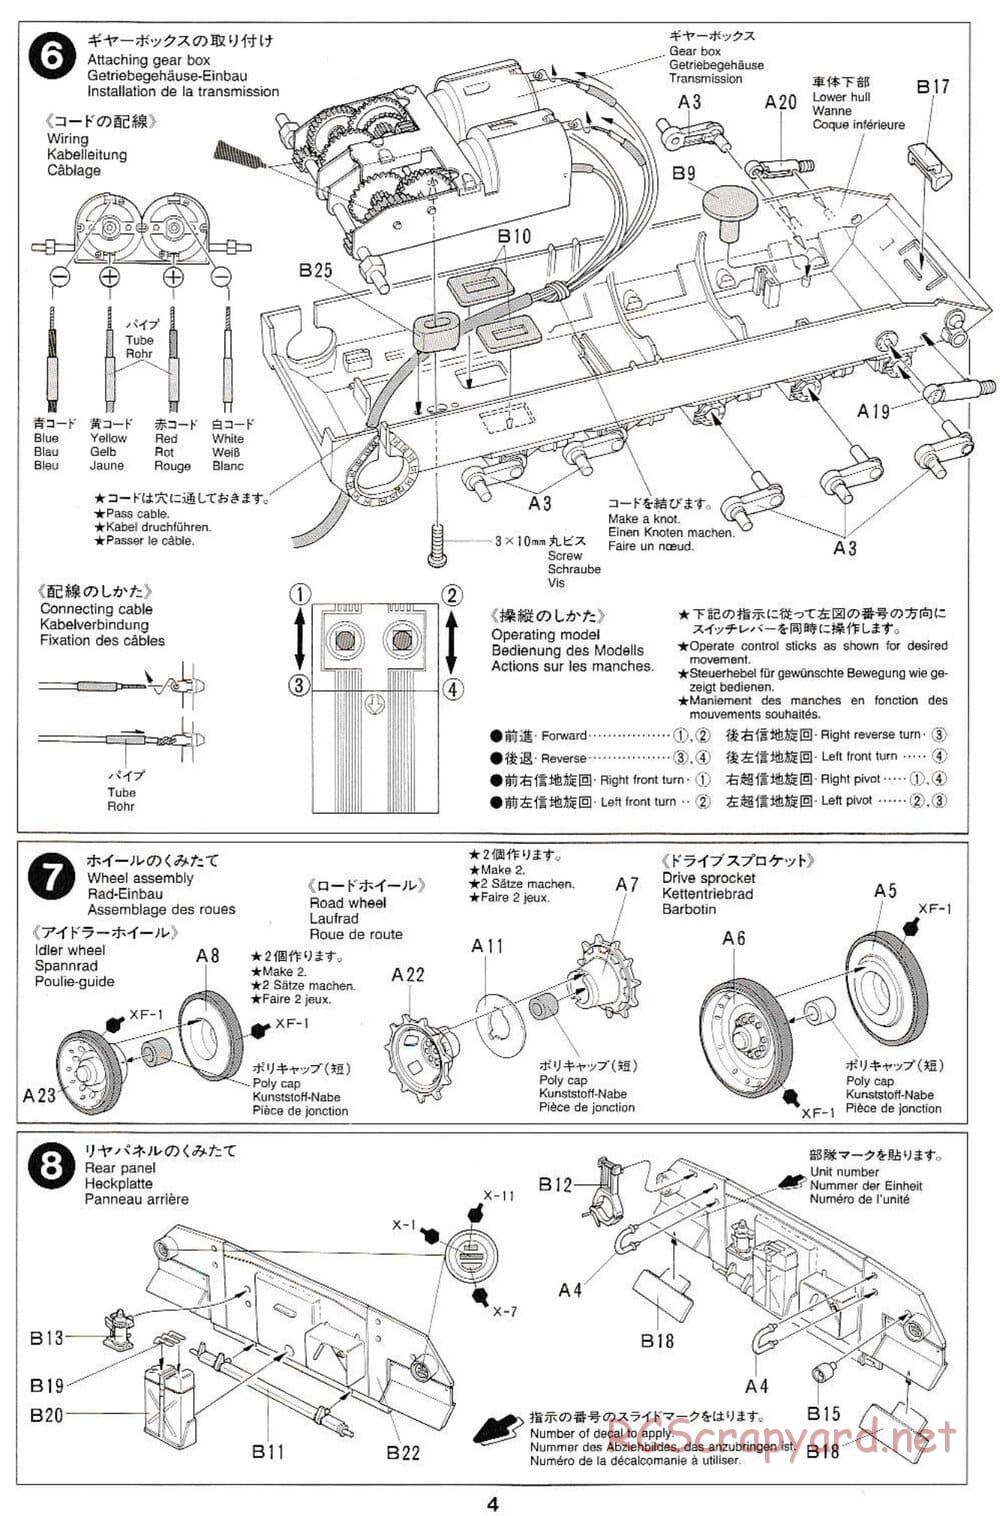 Tamiya - J.G.S.D.F. Type 74 - 1/35 Scale Chassis - Manual - Page 4